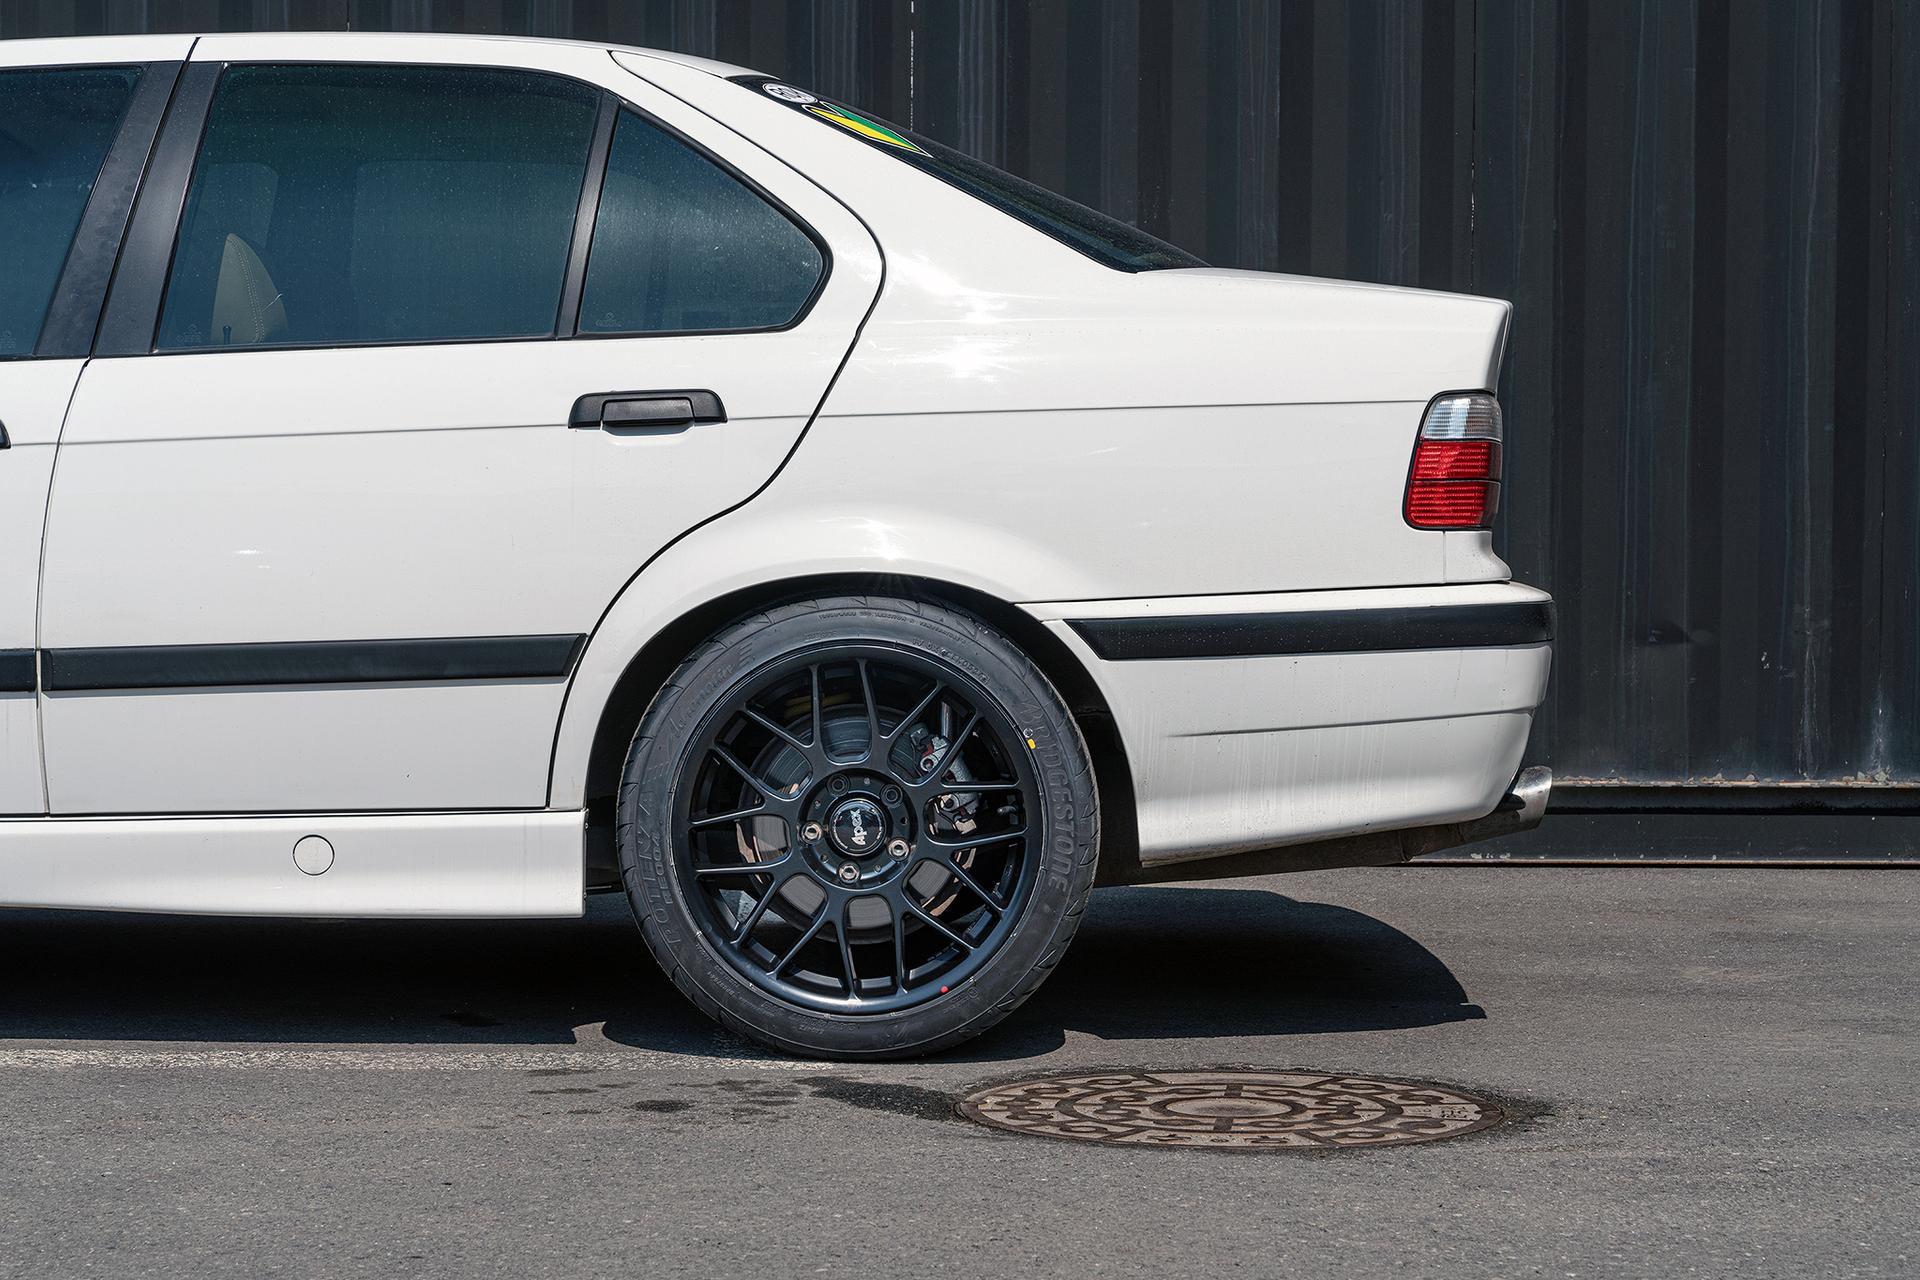 BMW E36 3 Series with 17" ARC-8 in Satin Black